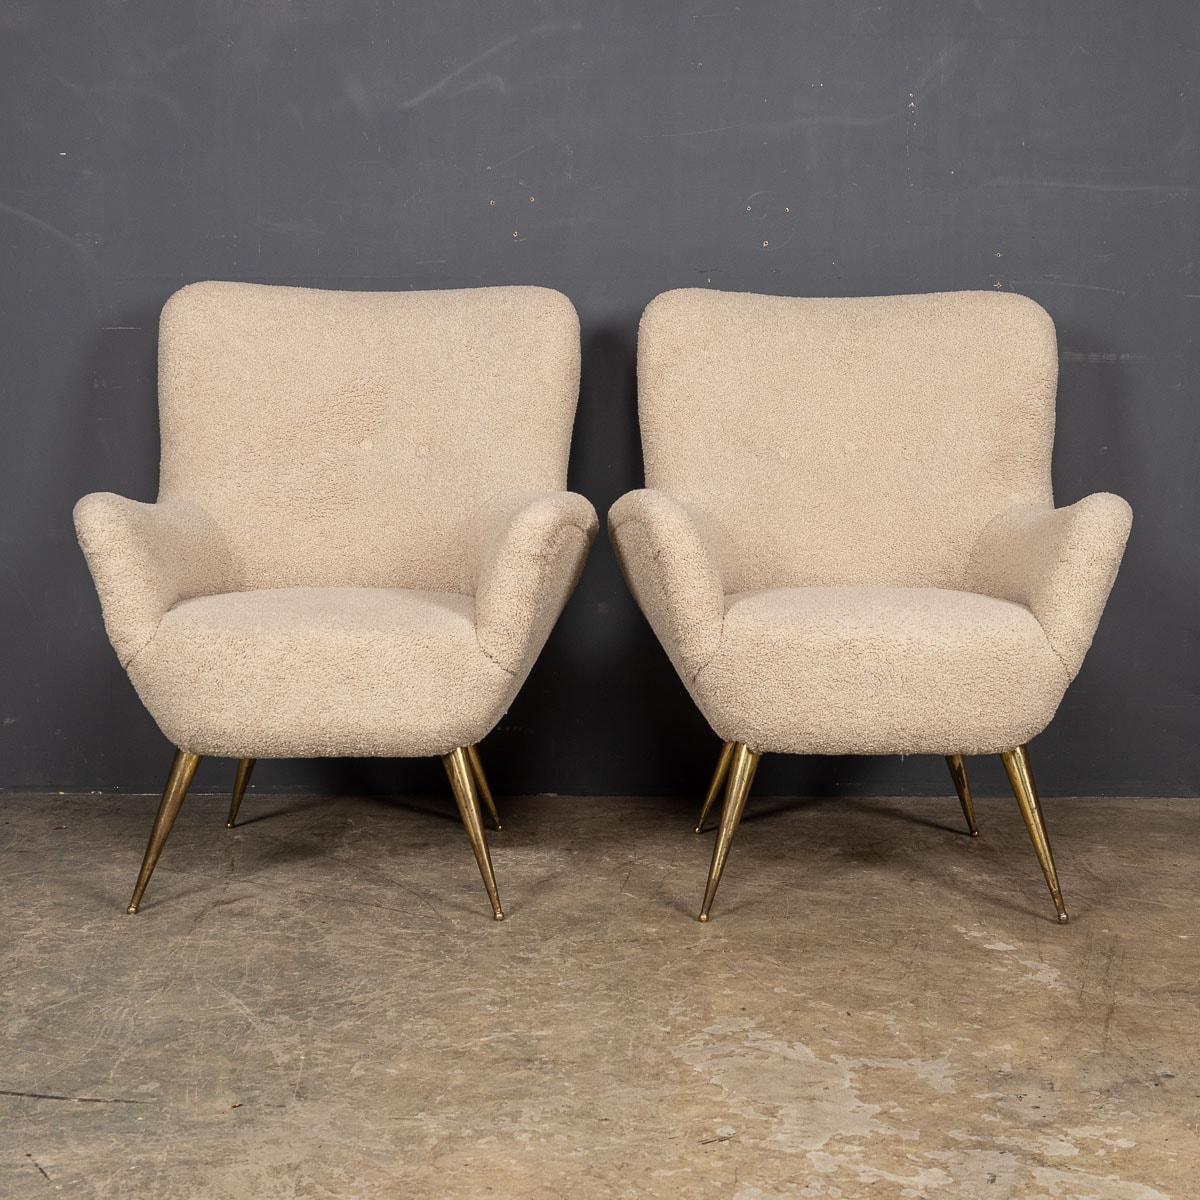 20th Century Pair Of Italian Armchairs In Cream Boucle, c.1950 In Good Condition For Sale In Royal Tunbridge Wells, Kent